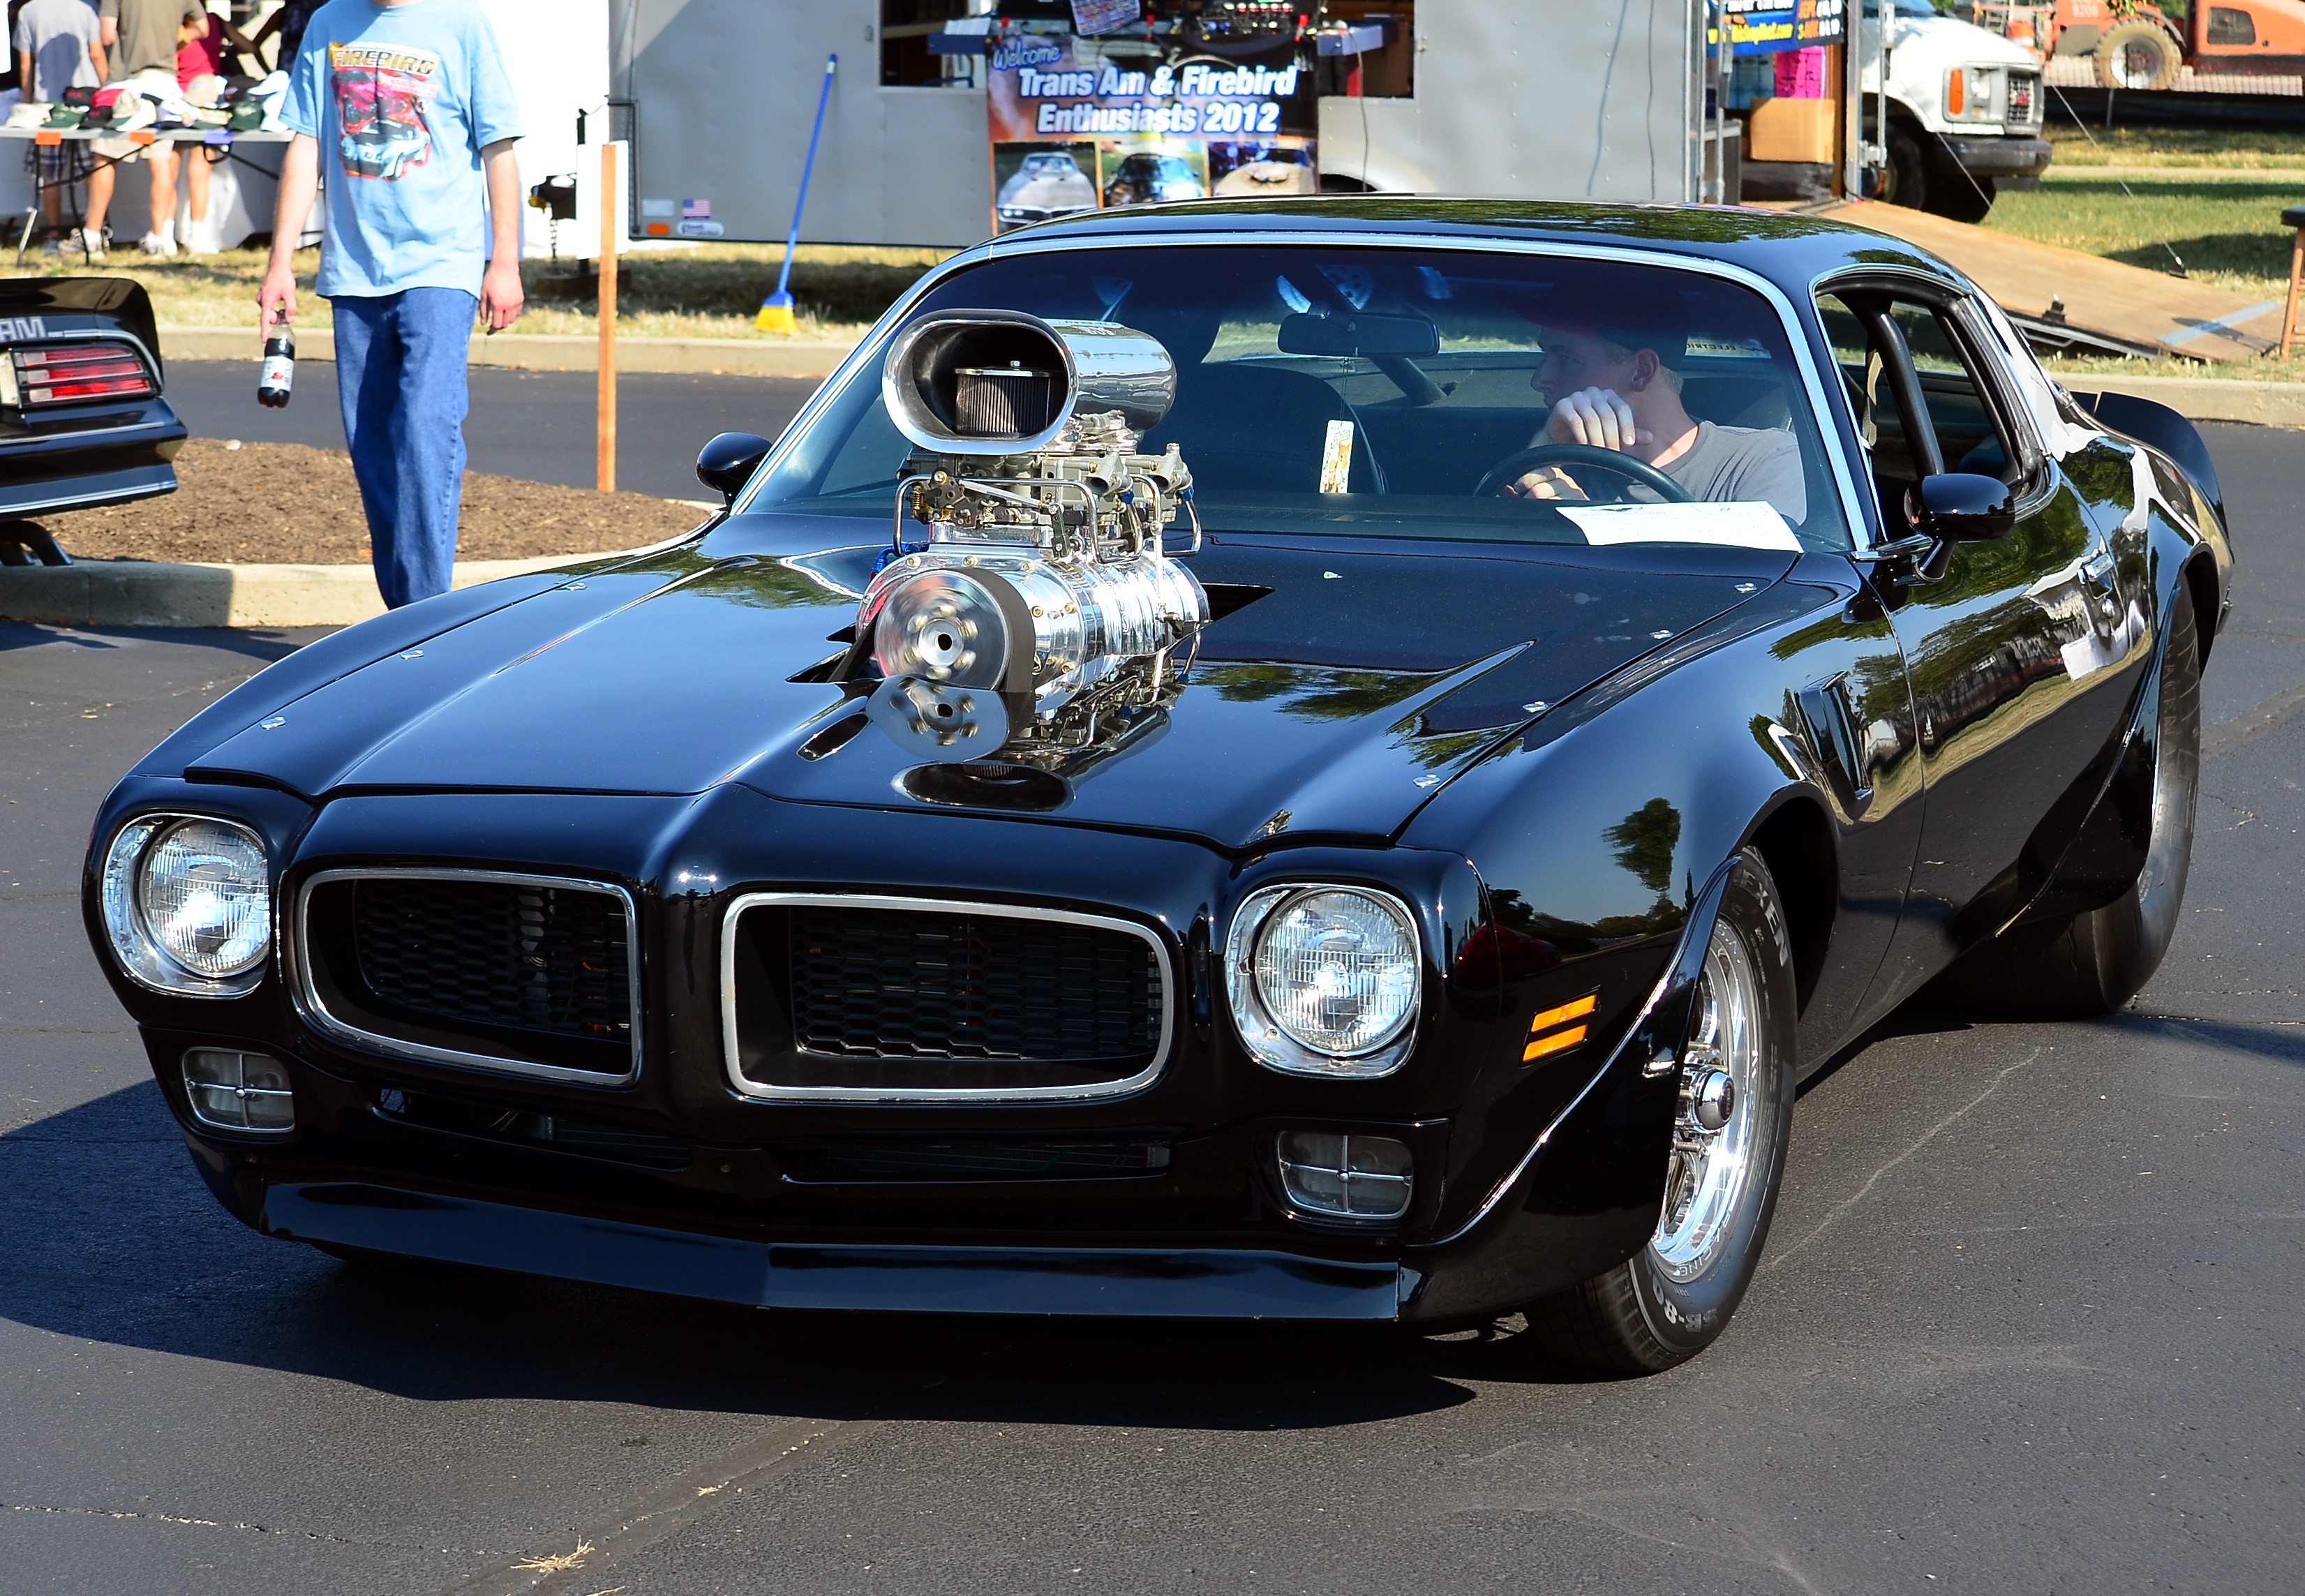 pontiac, Trans, Am, Tuning, Custom, Muscle, Hot, Rod, Rods, Classic, Engine, Engines Wallpaper